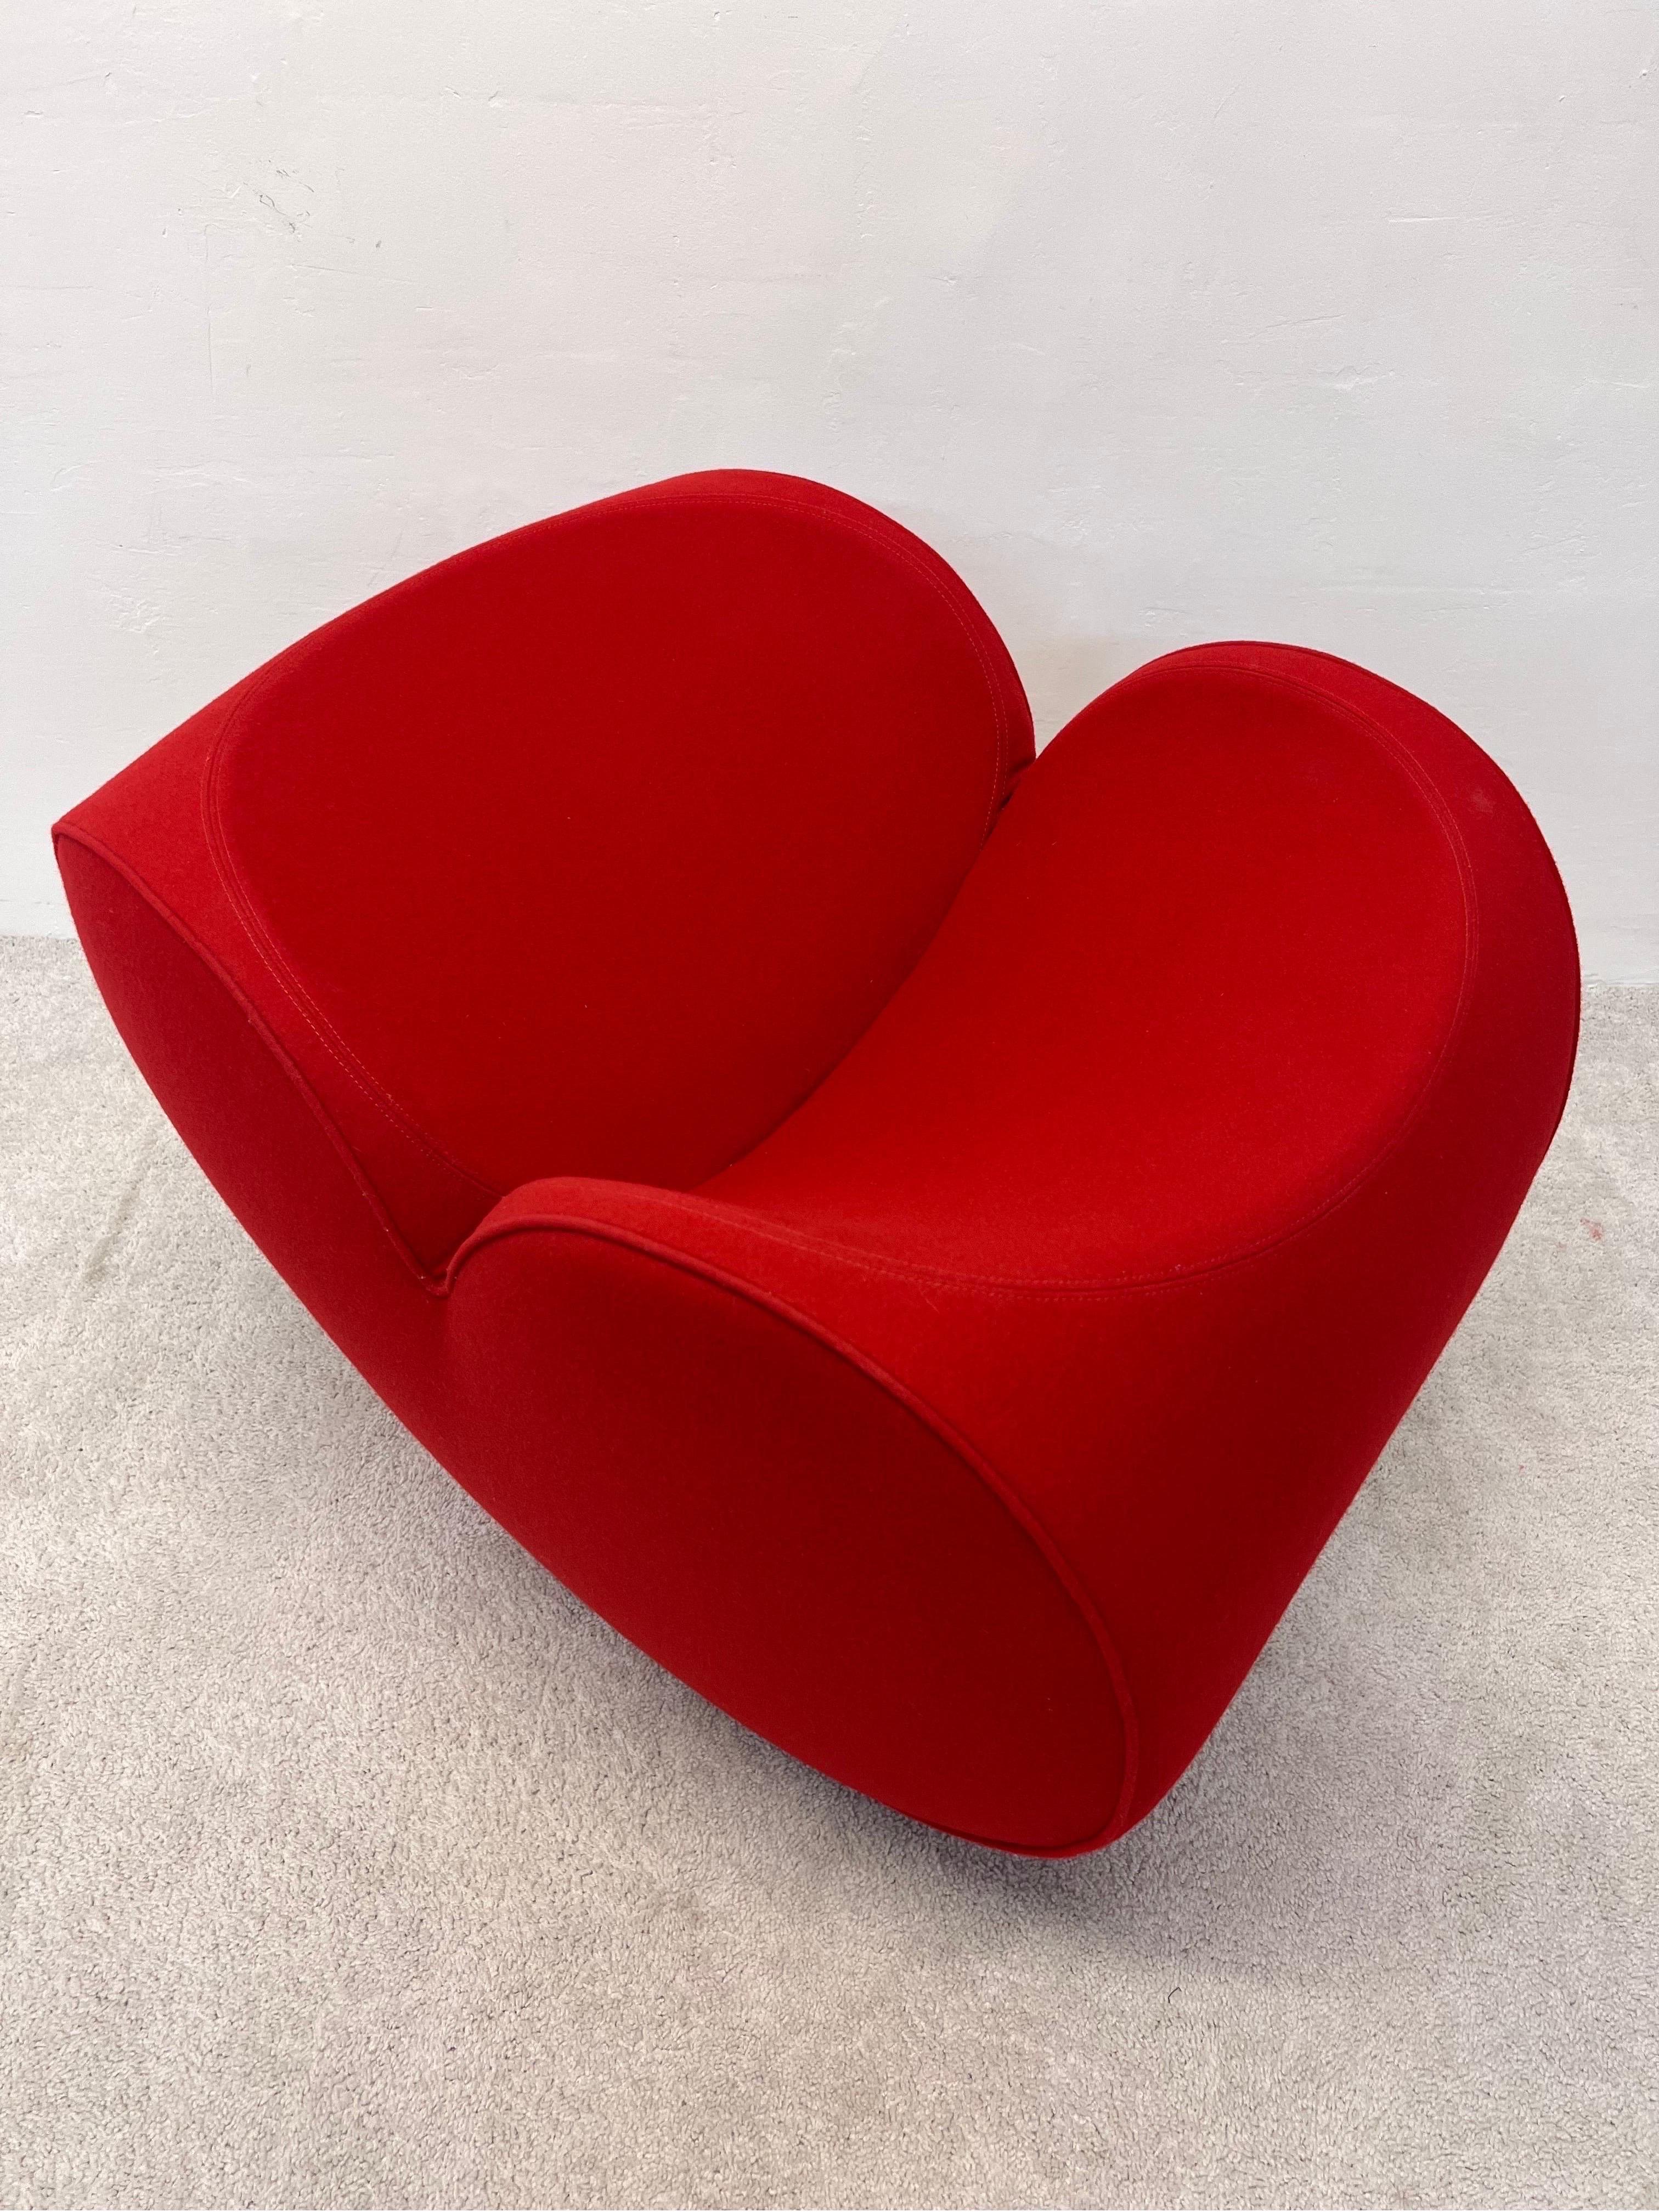 Steel Ron Arad Spring Collection Soft Heart Chair for Moroso For Sale